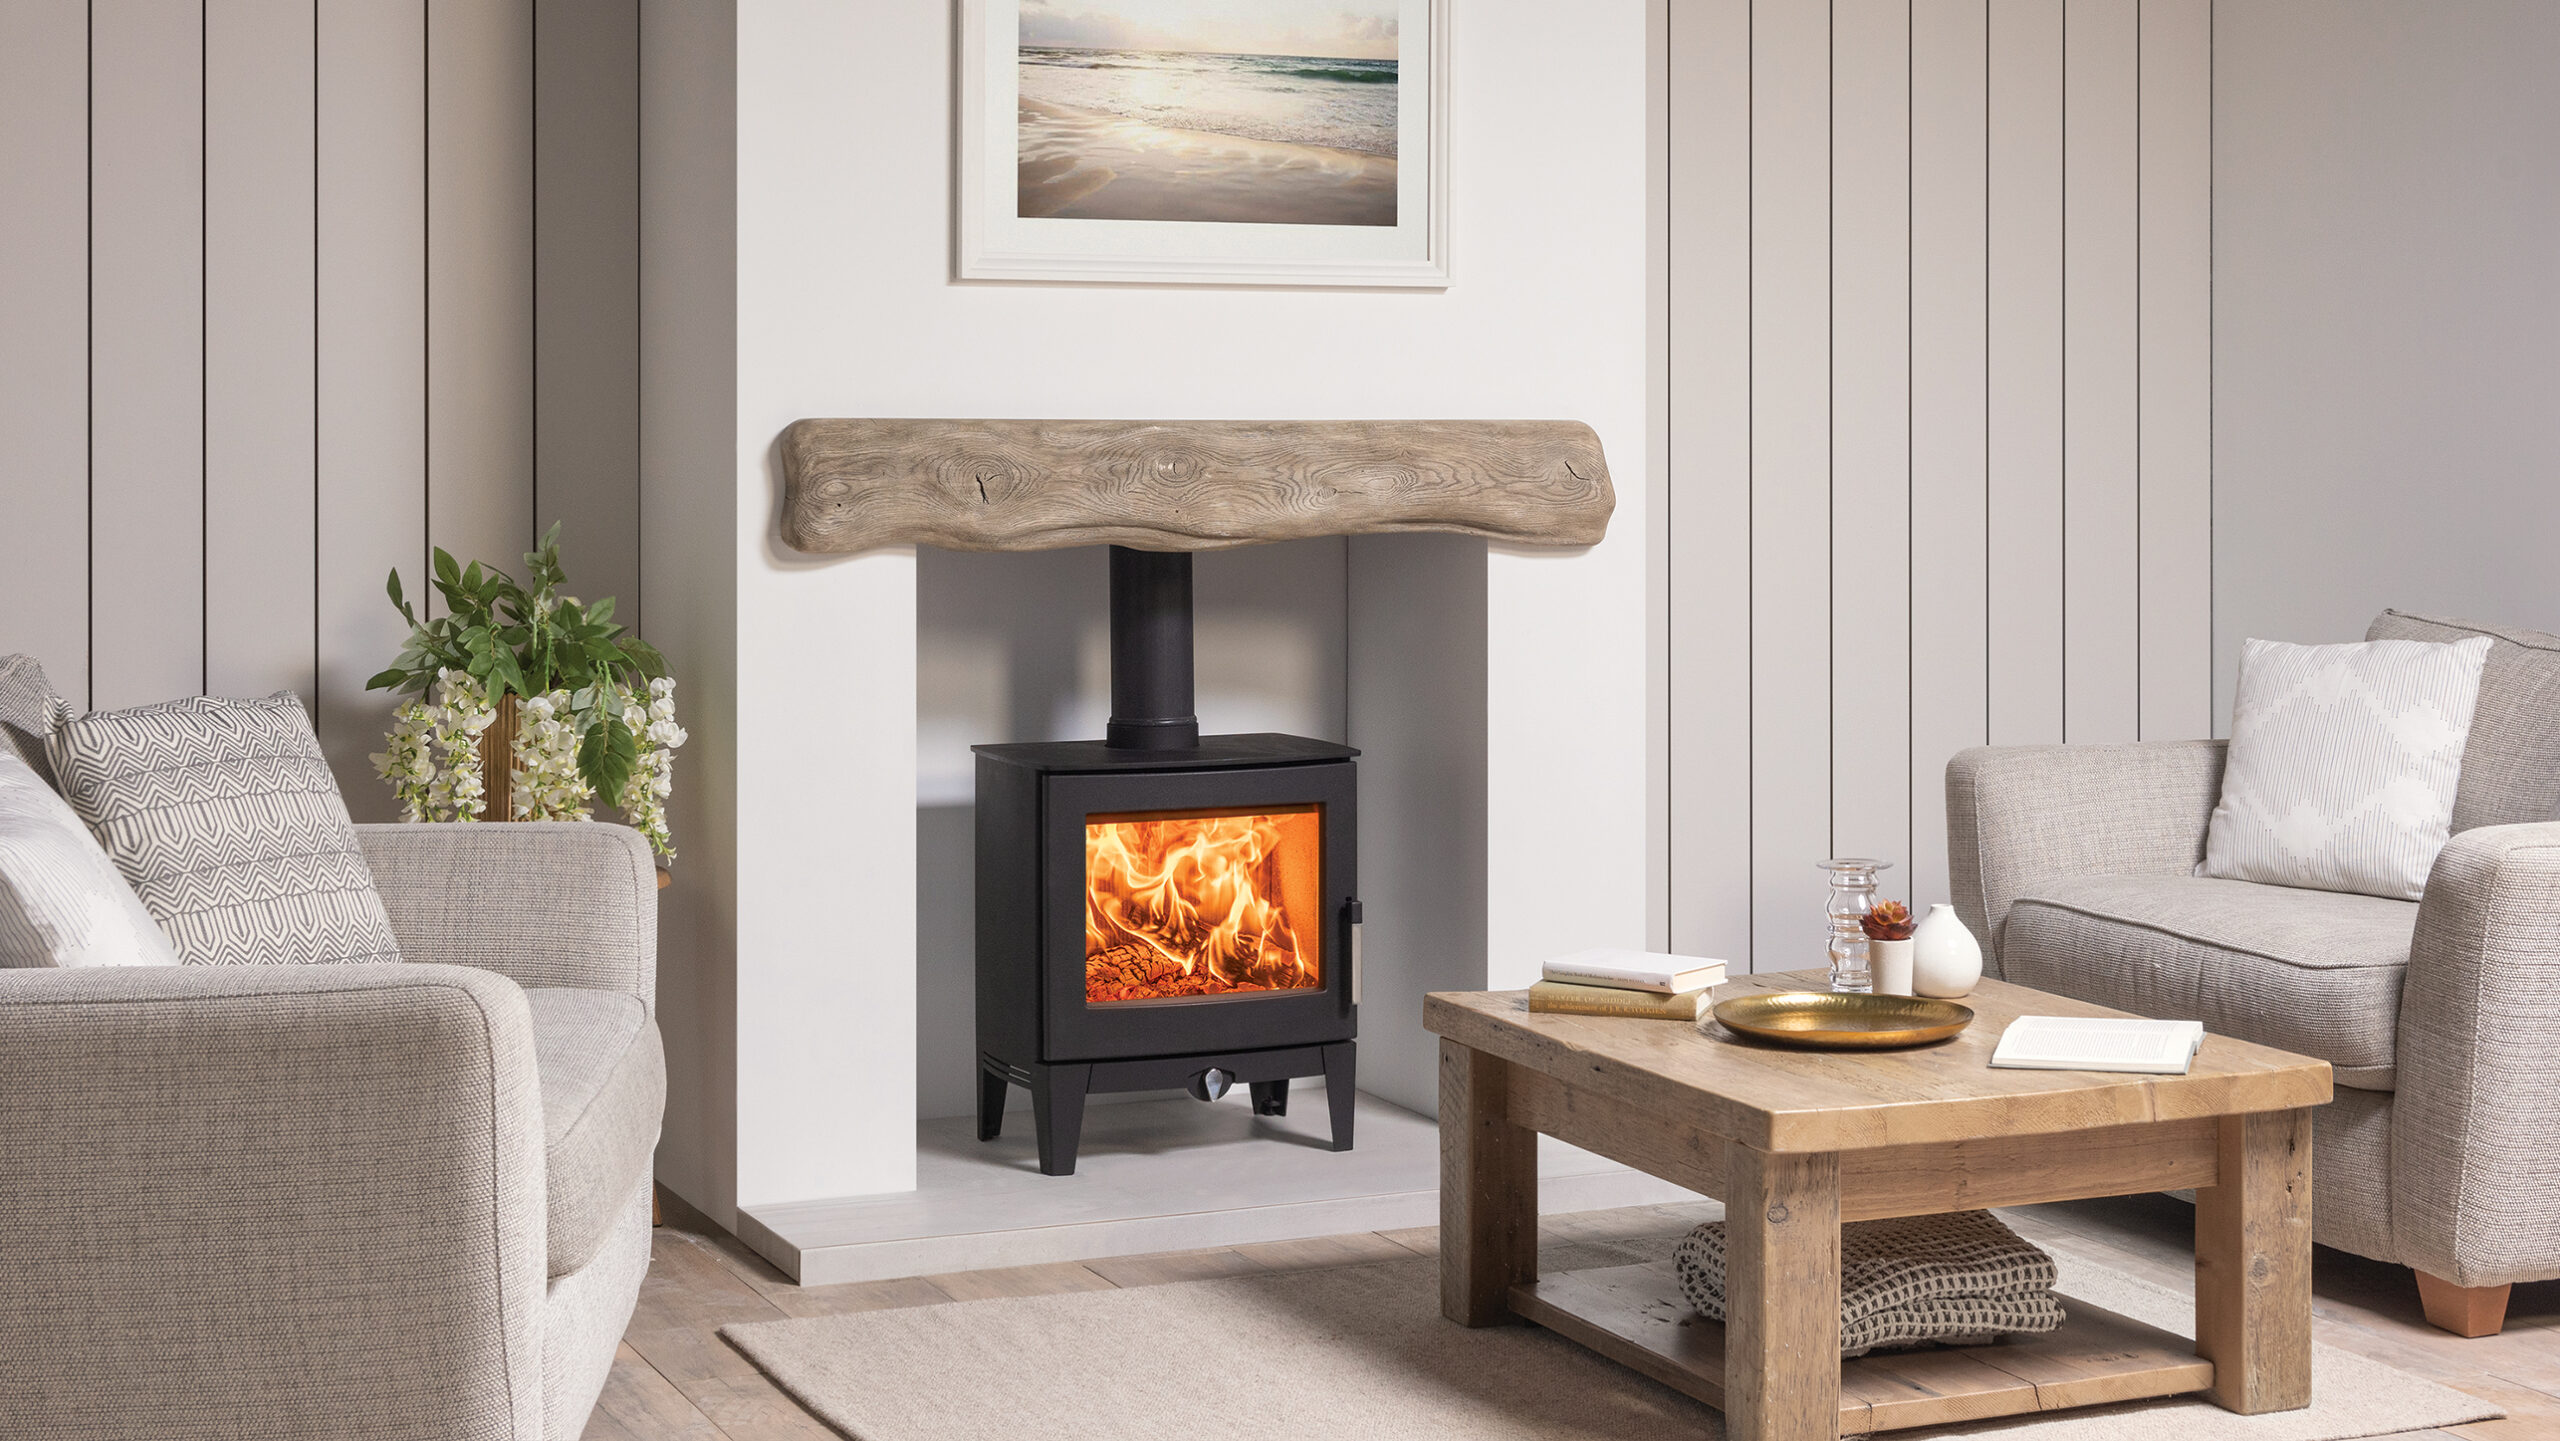 Modern wood burning stove Available styles and designs of wood burning stoves